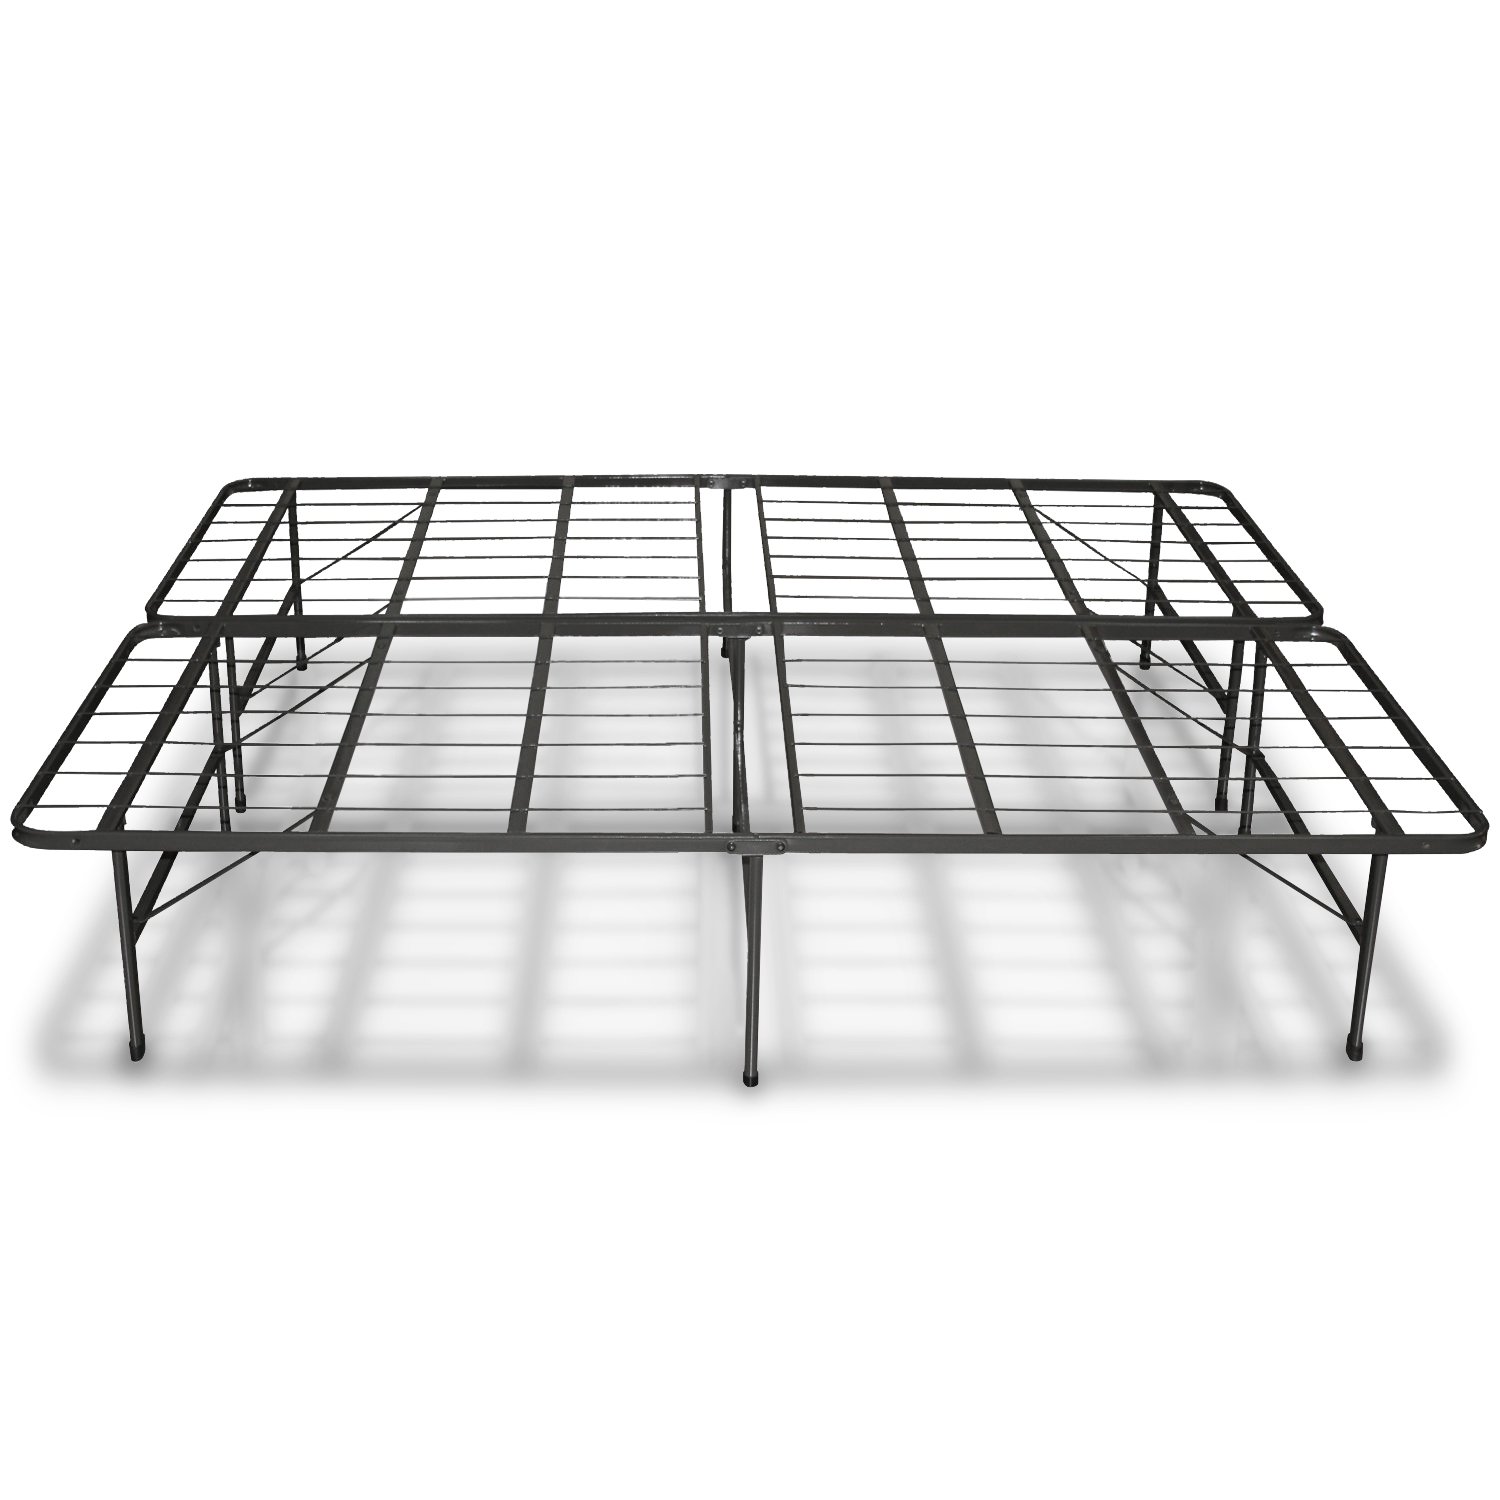 Best Price Mattress New Innovated Box Spring Metal Bed Frame, Queen ...